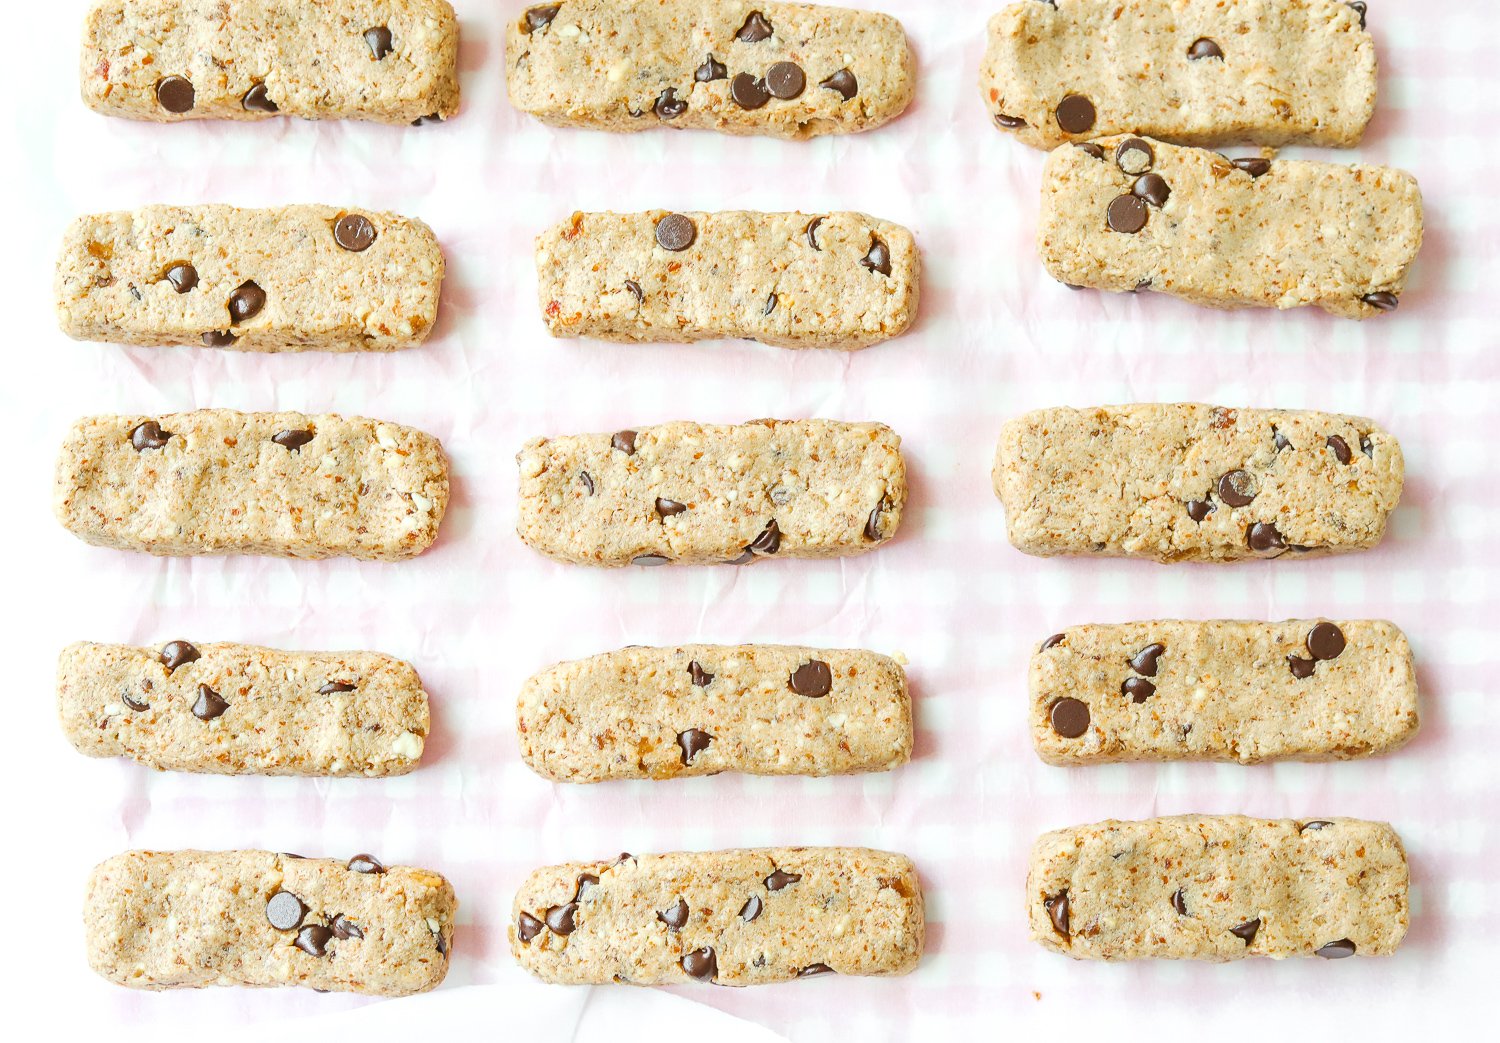 homemade protein bars, protein bars, homemade protein balls, orgain protein powder, almond protein bars, vegan protein bars, healthy protein bars for kids, vegan chocolate chips, date protein bars, peanut-free protein bars, healthy eating, gluten free, grain free, low calorie, homage protein cookie dough